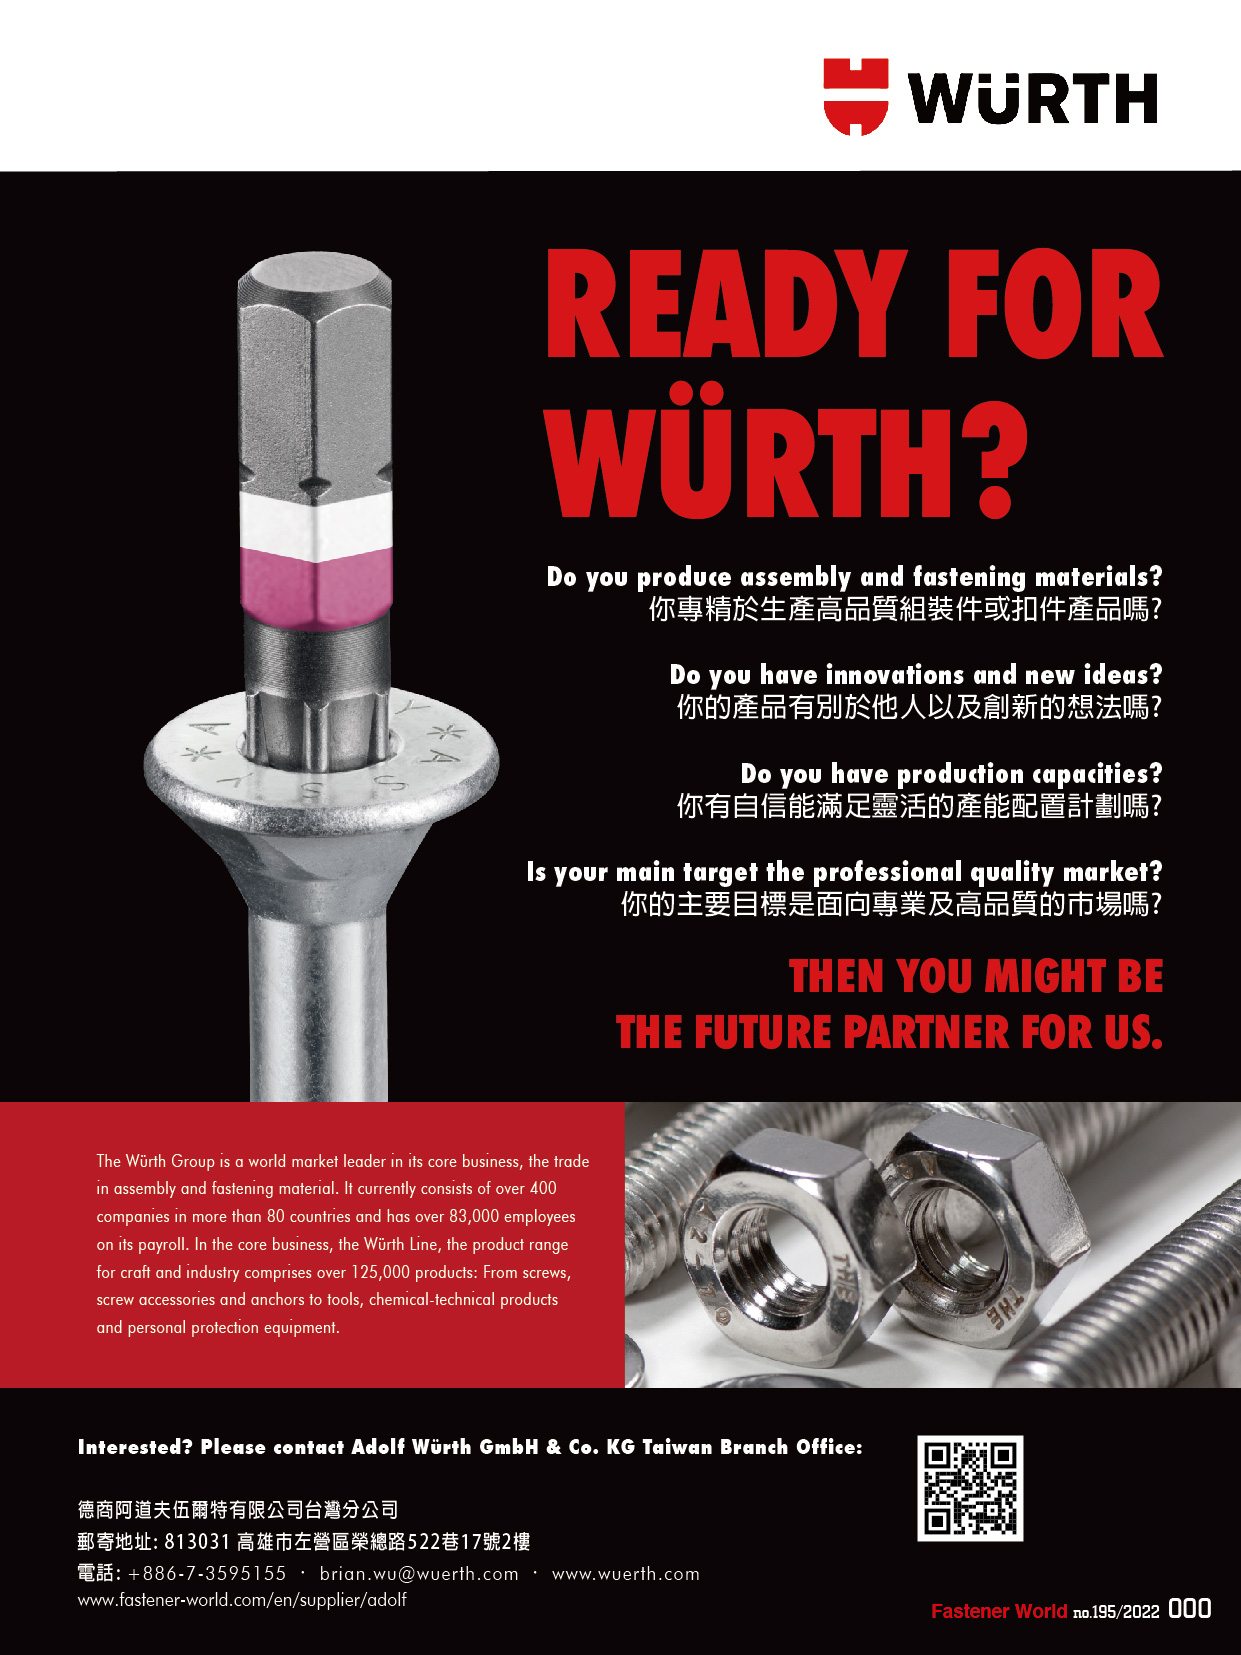 WURTH GROUP (Adolf Wurth GmbH & Co. KG) , Screws, Screw Accessories, Anchors, Tools, Chemical-technical products...